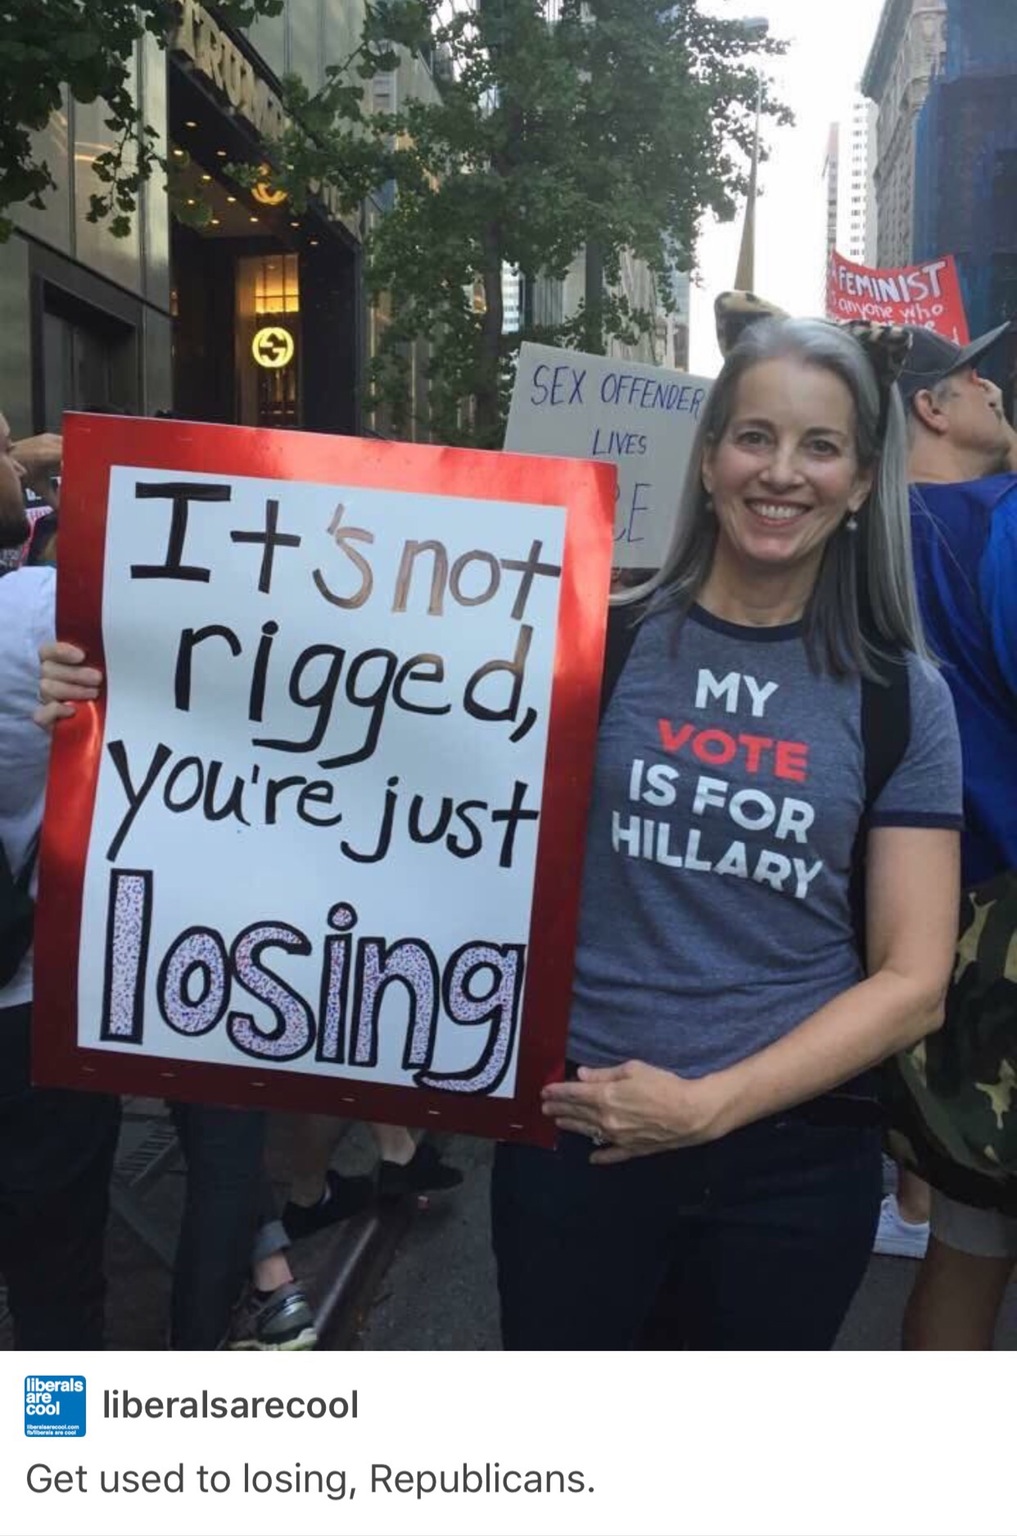 it's not rigged you re just losing - Feminist Reviso Sex Offender Lives It's not My rigged, you're just Heltor Vote Is For Hillary losing liberals het liberalsarecool Get used to losing, Republicans.